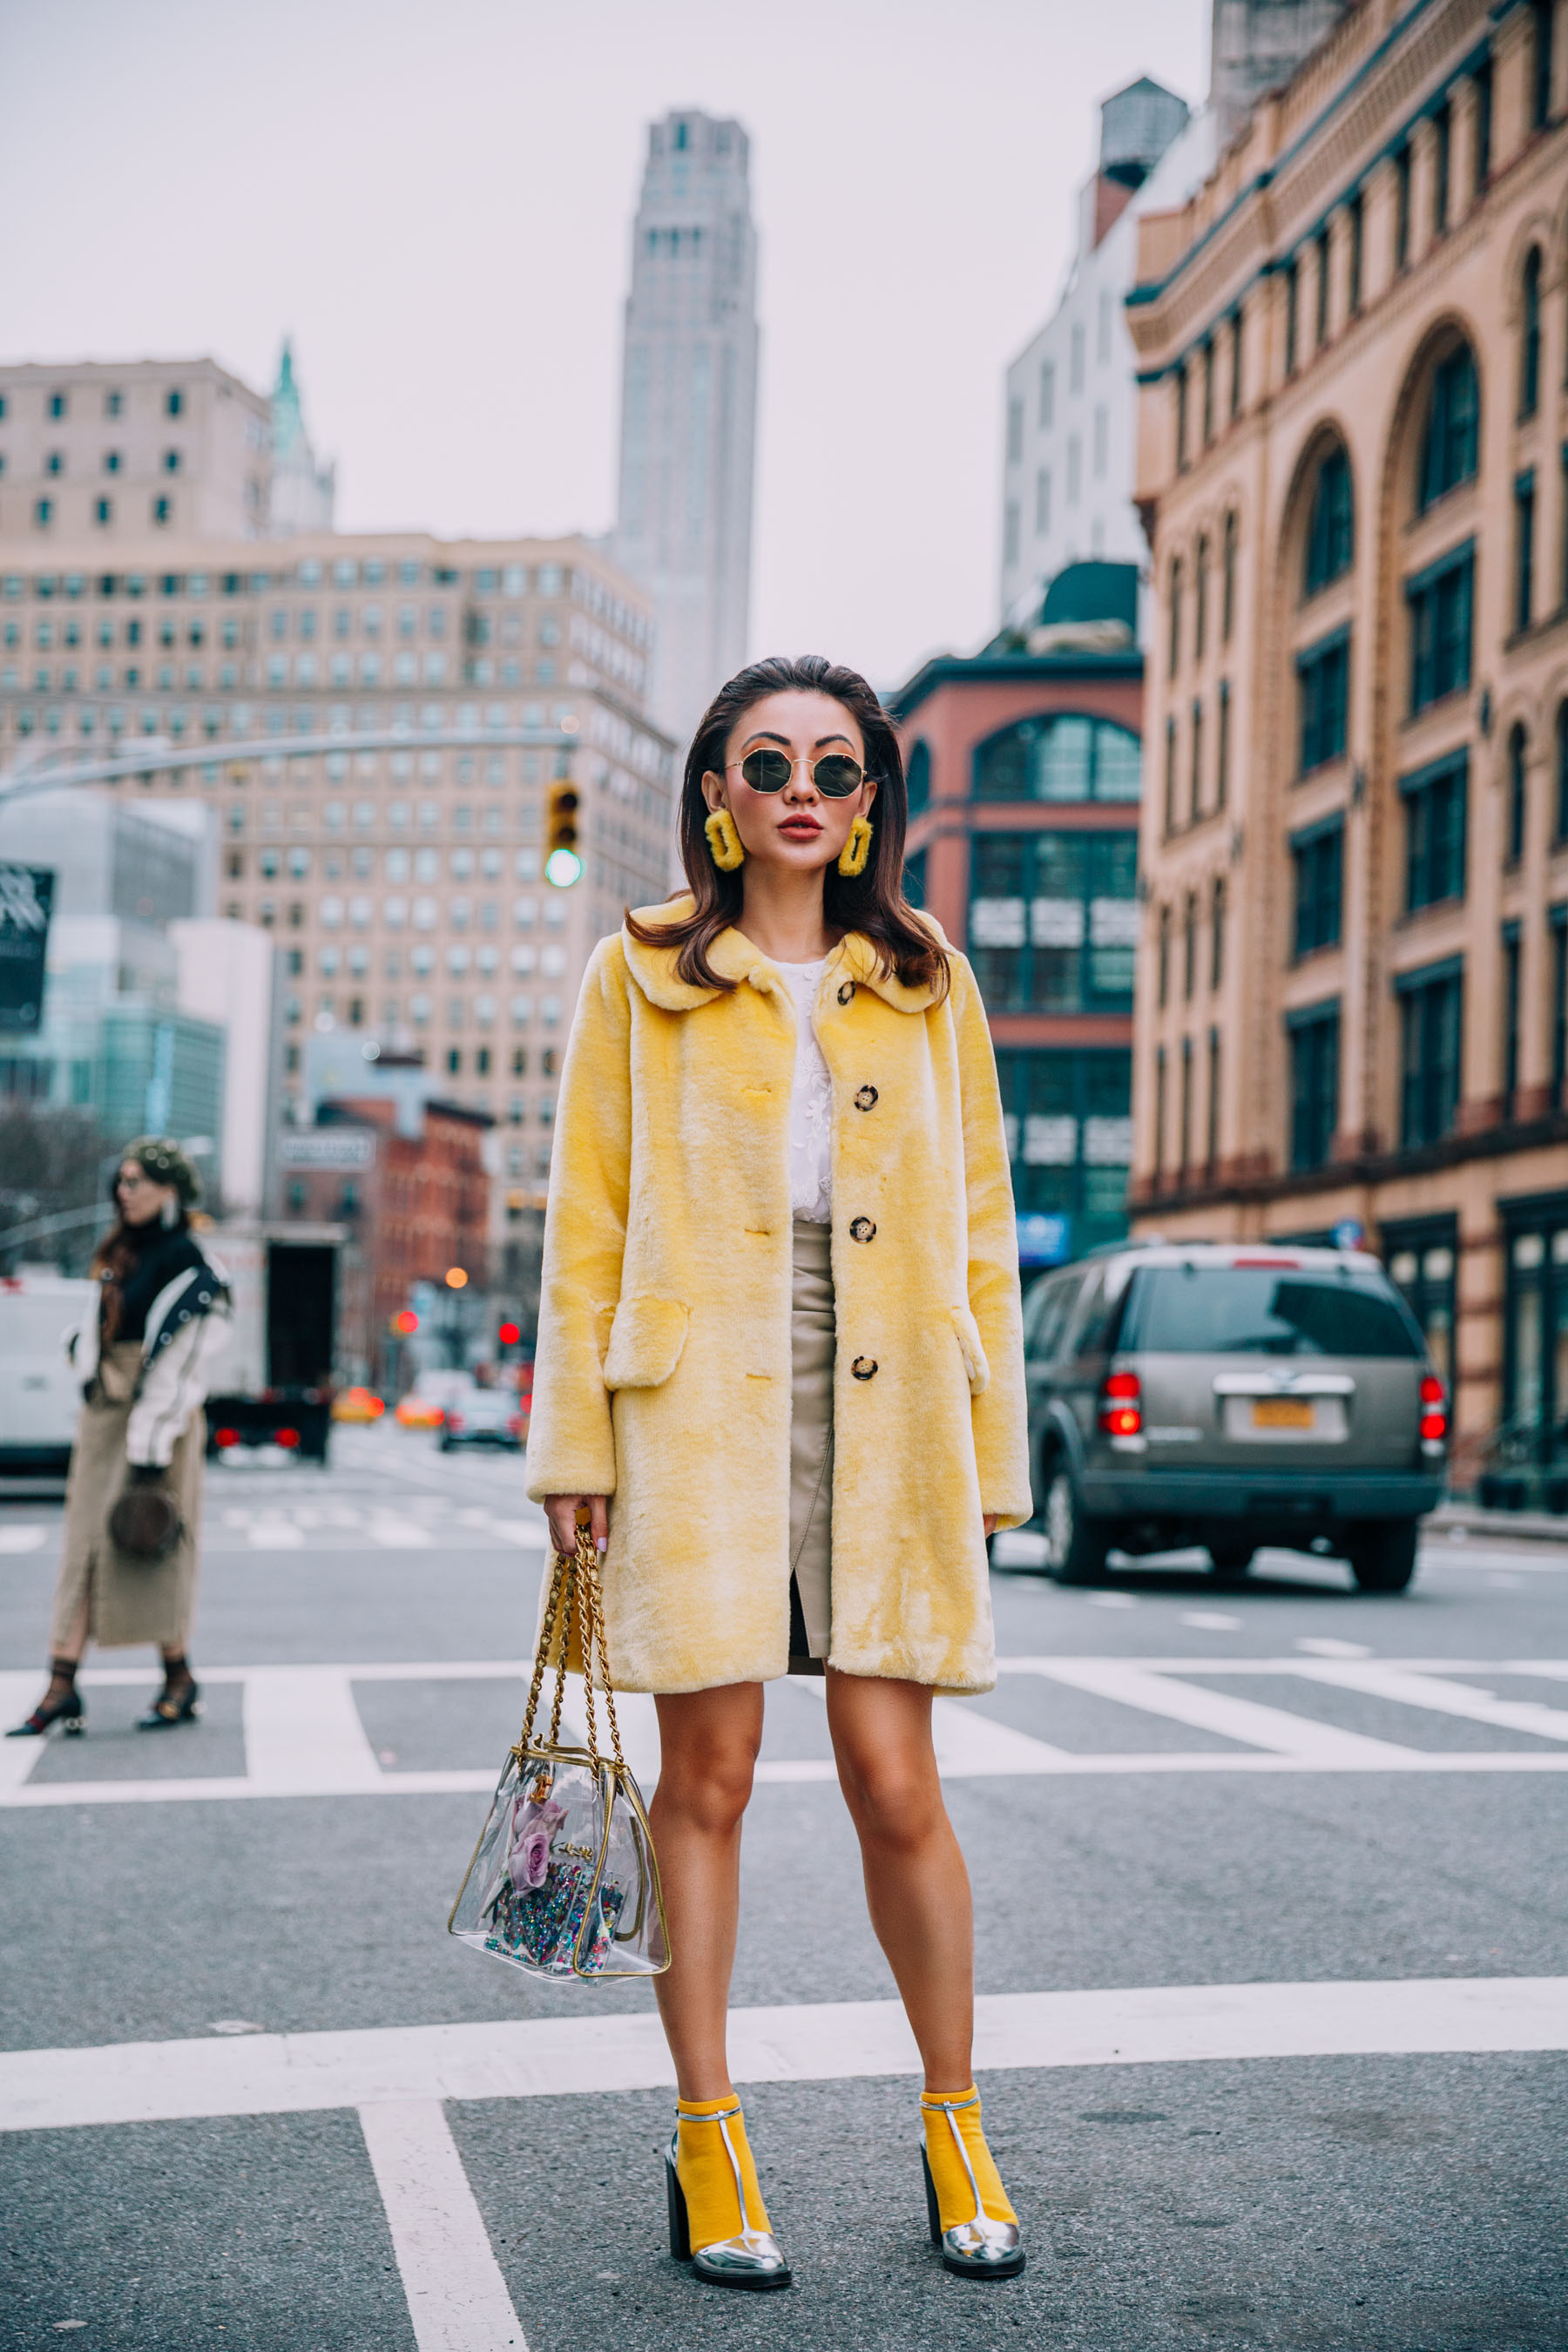 NYFW 2018 Street Style - Yellow Shrimps Coat with Chanel Clear Bag // Notjessfashion.com